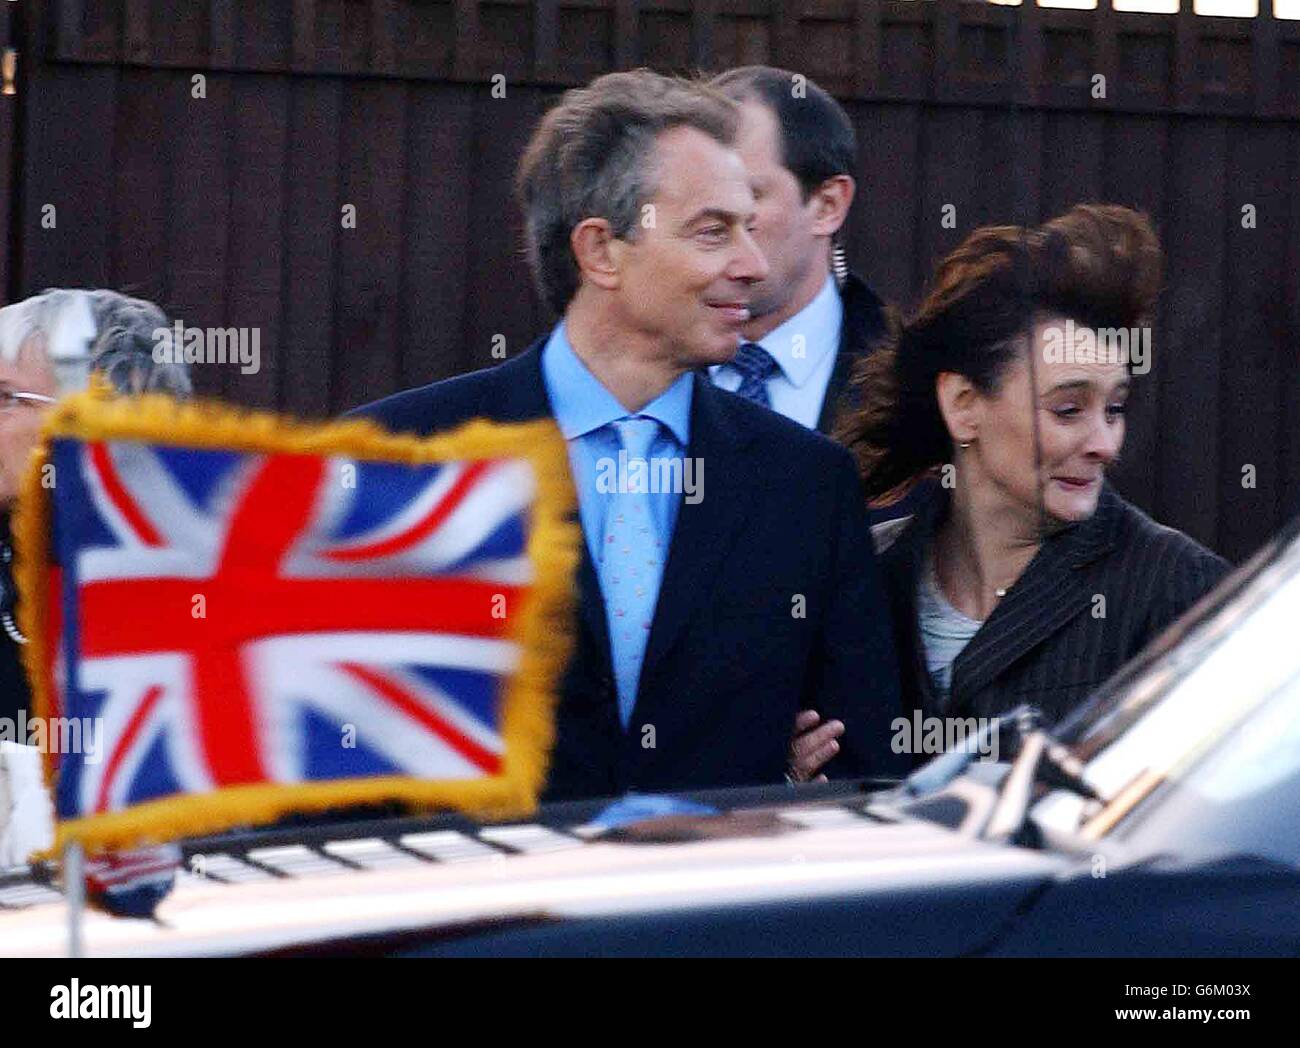 British Prime Minister Tony Blair, alongside his wife Cherie as the US President and wife, Laura depart form Mr Blair's constituency of Sedgefield in County Durham. It was understood that today's trip was designed to offer the chance for the Mr Blair and President Bush to spend time together in more relaxed conditions, following the high-profile speeches, political discussions and pageantry of the past two days. Stock Photo